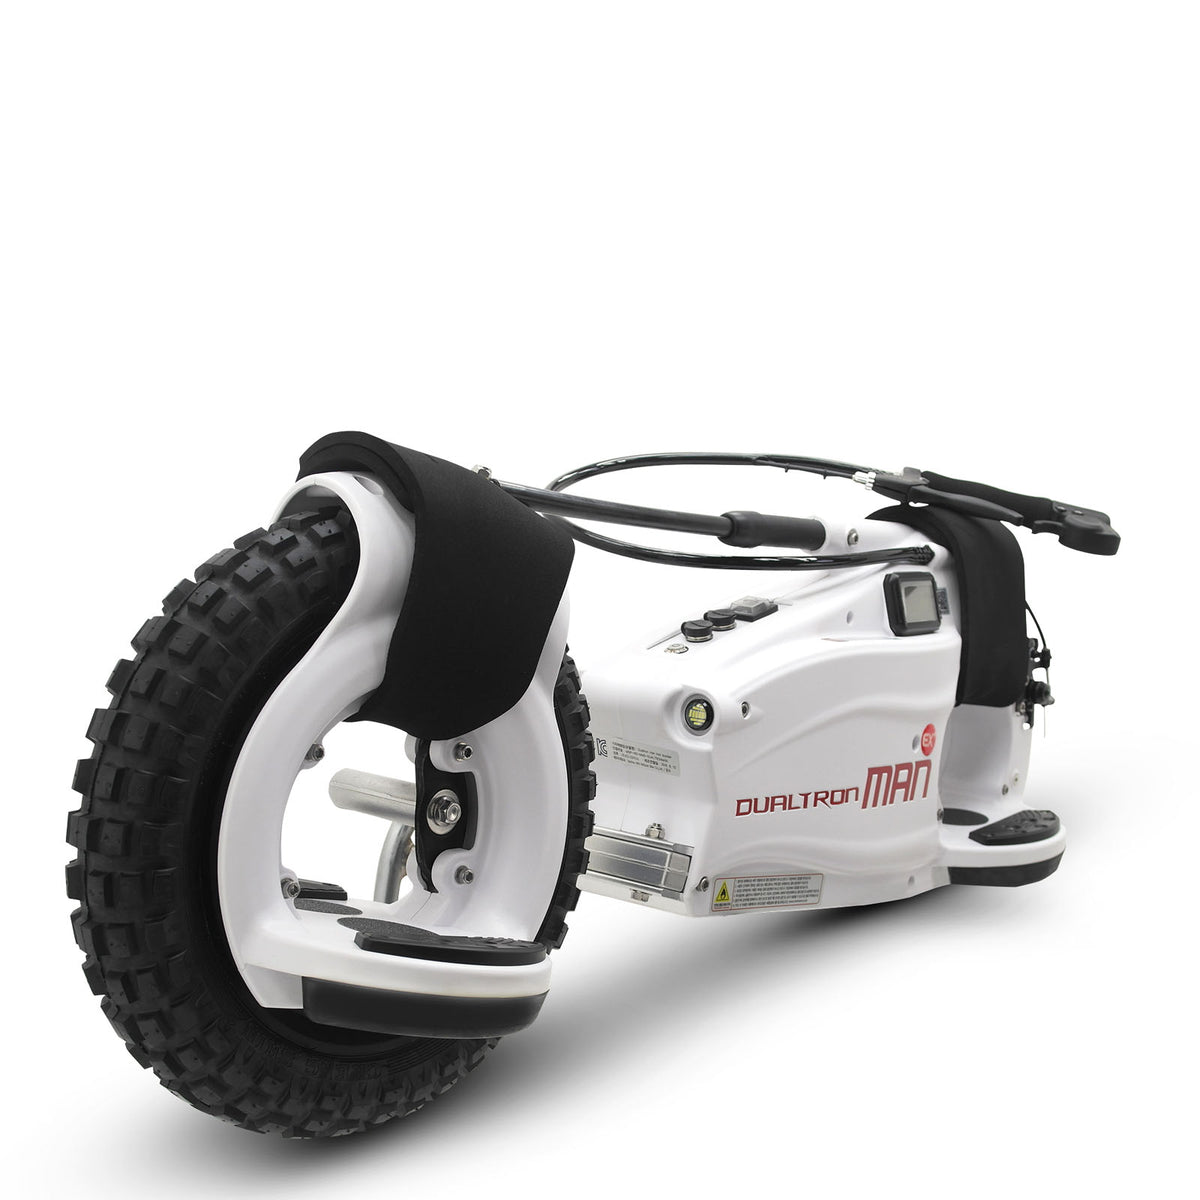 Dualtron Man Electric Scooter EX+ Rear